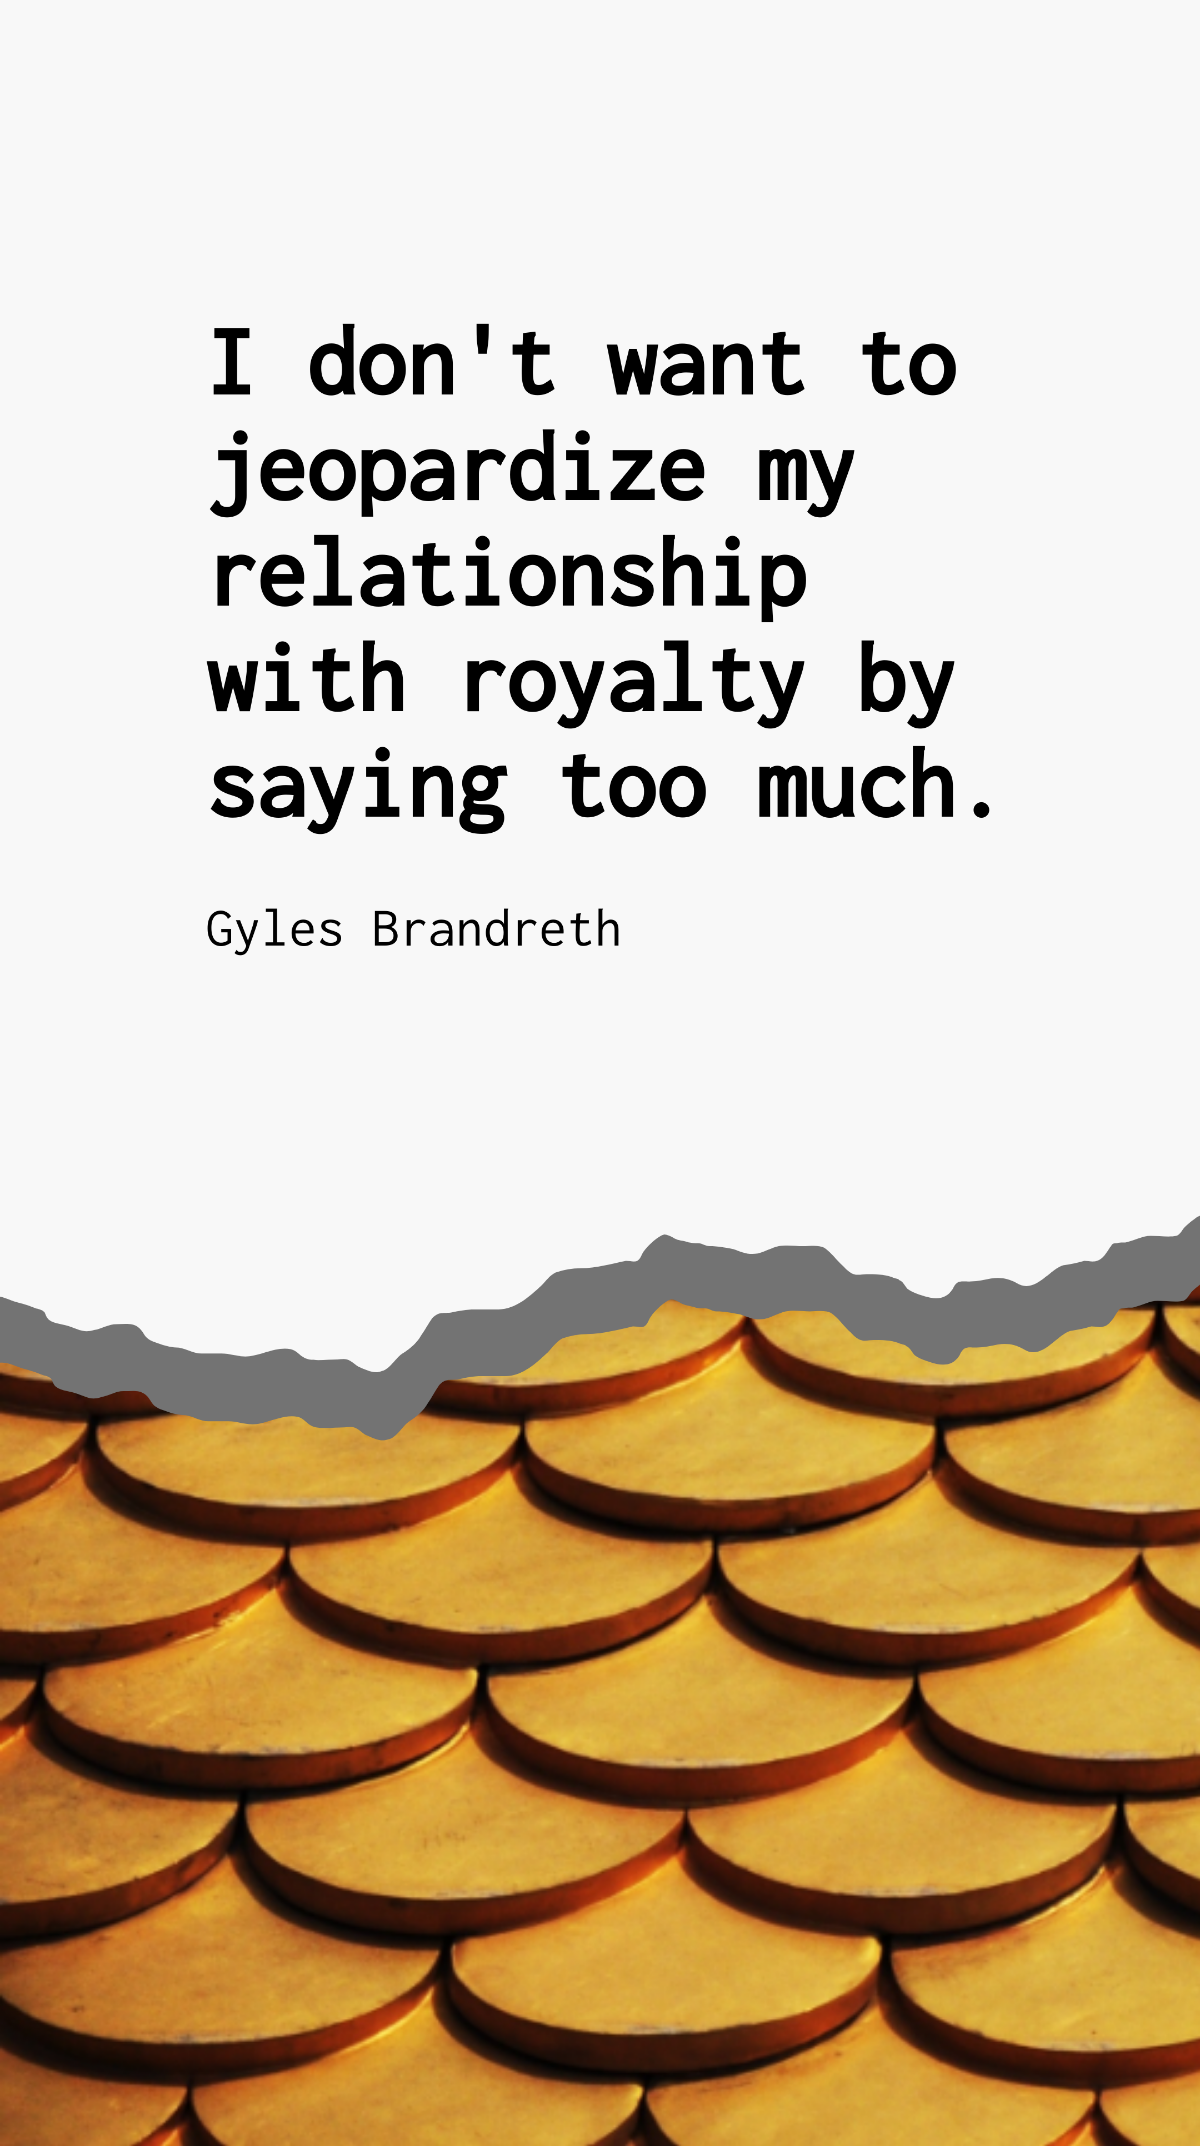 Gyles Brandreth - I don't want to jeopardize my relationship with royalty by saying too much. Template